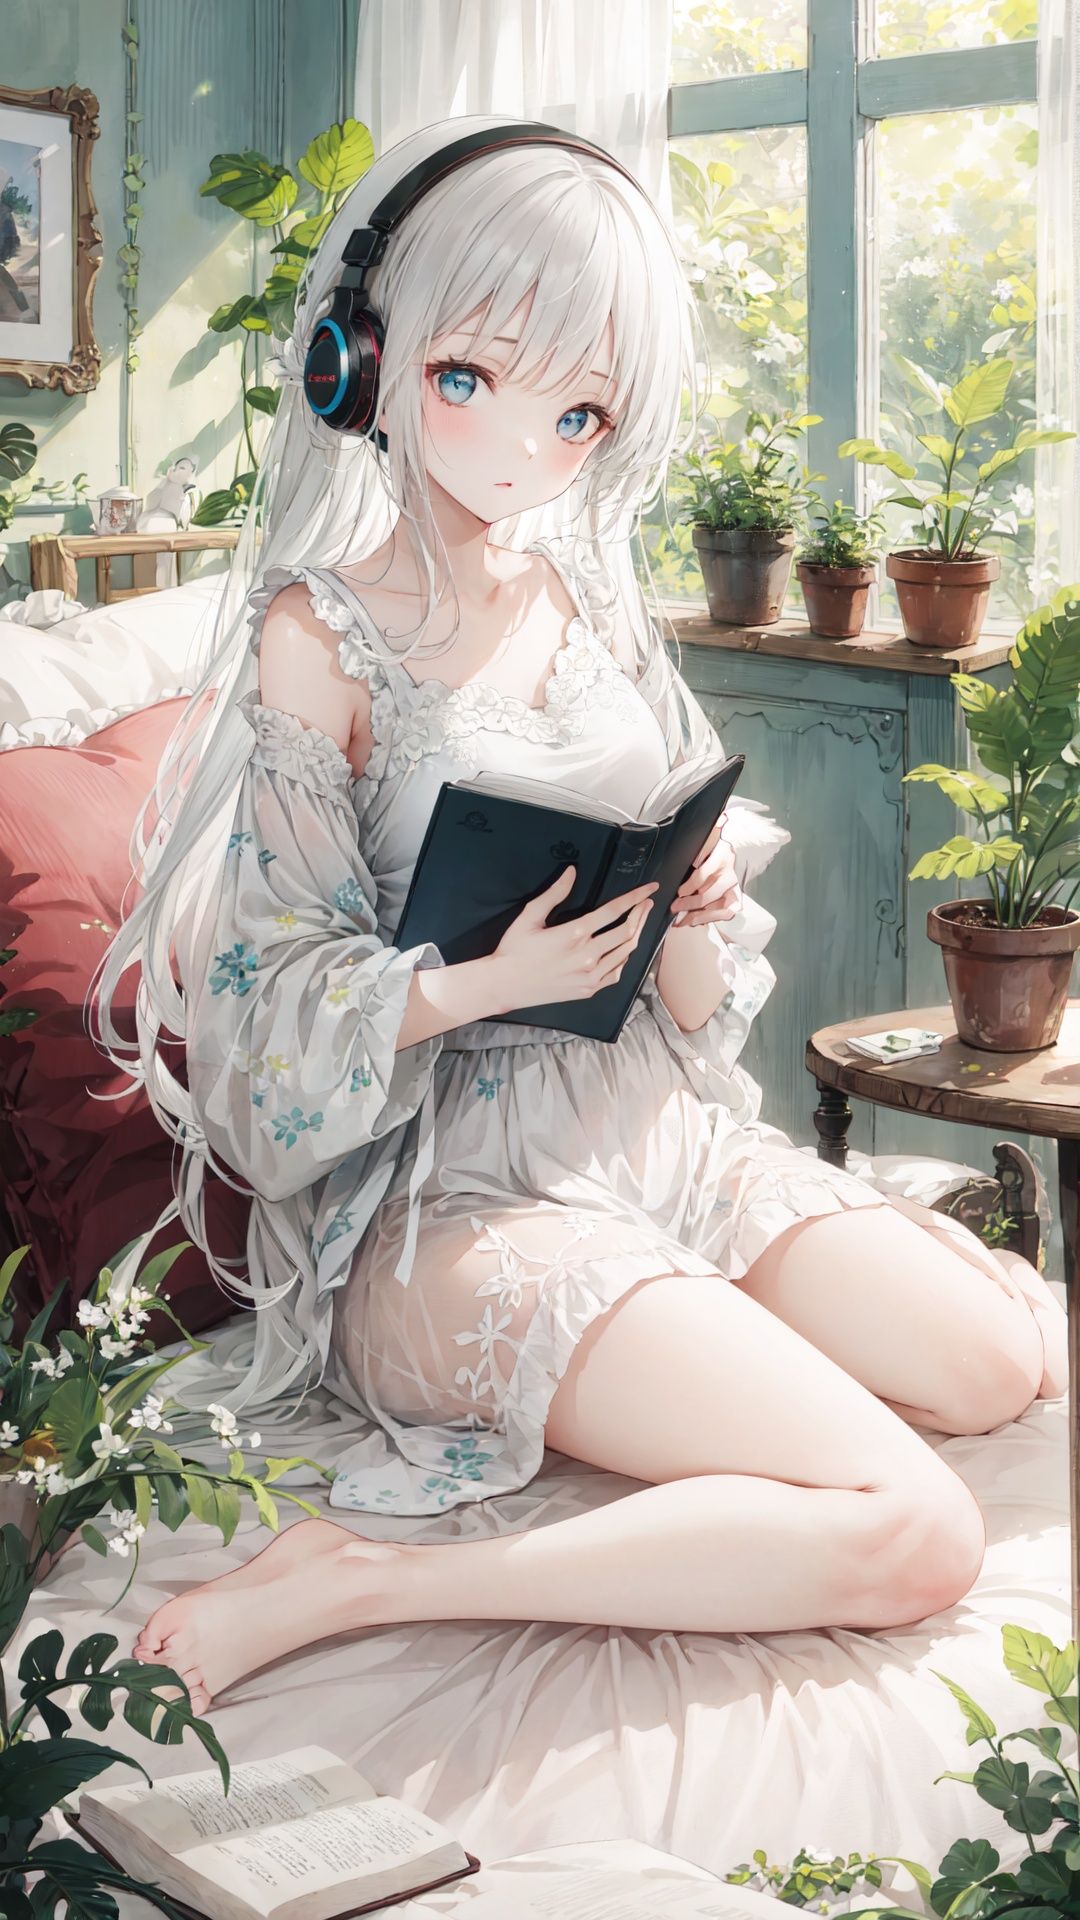 extremely delicate and beautiful,
depth of field,amazing,masterpiece,growth,visual impact,
ultra-detailed,

1girl, long_hair, window, book, pillow, barefoot, solo, plant, very_long_hair, indoors, potted_plant, headphones, cup,
gorgeous,fantasism,nature,refined rendering,original,contour deepening,high-key and low-variance brightness scale,soft light,light and dark interlaced,